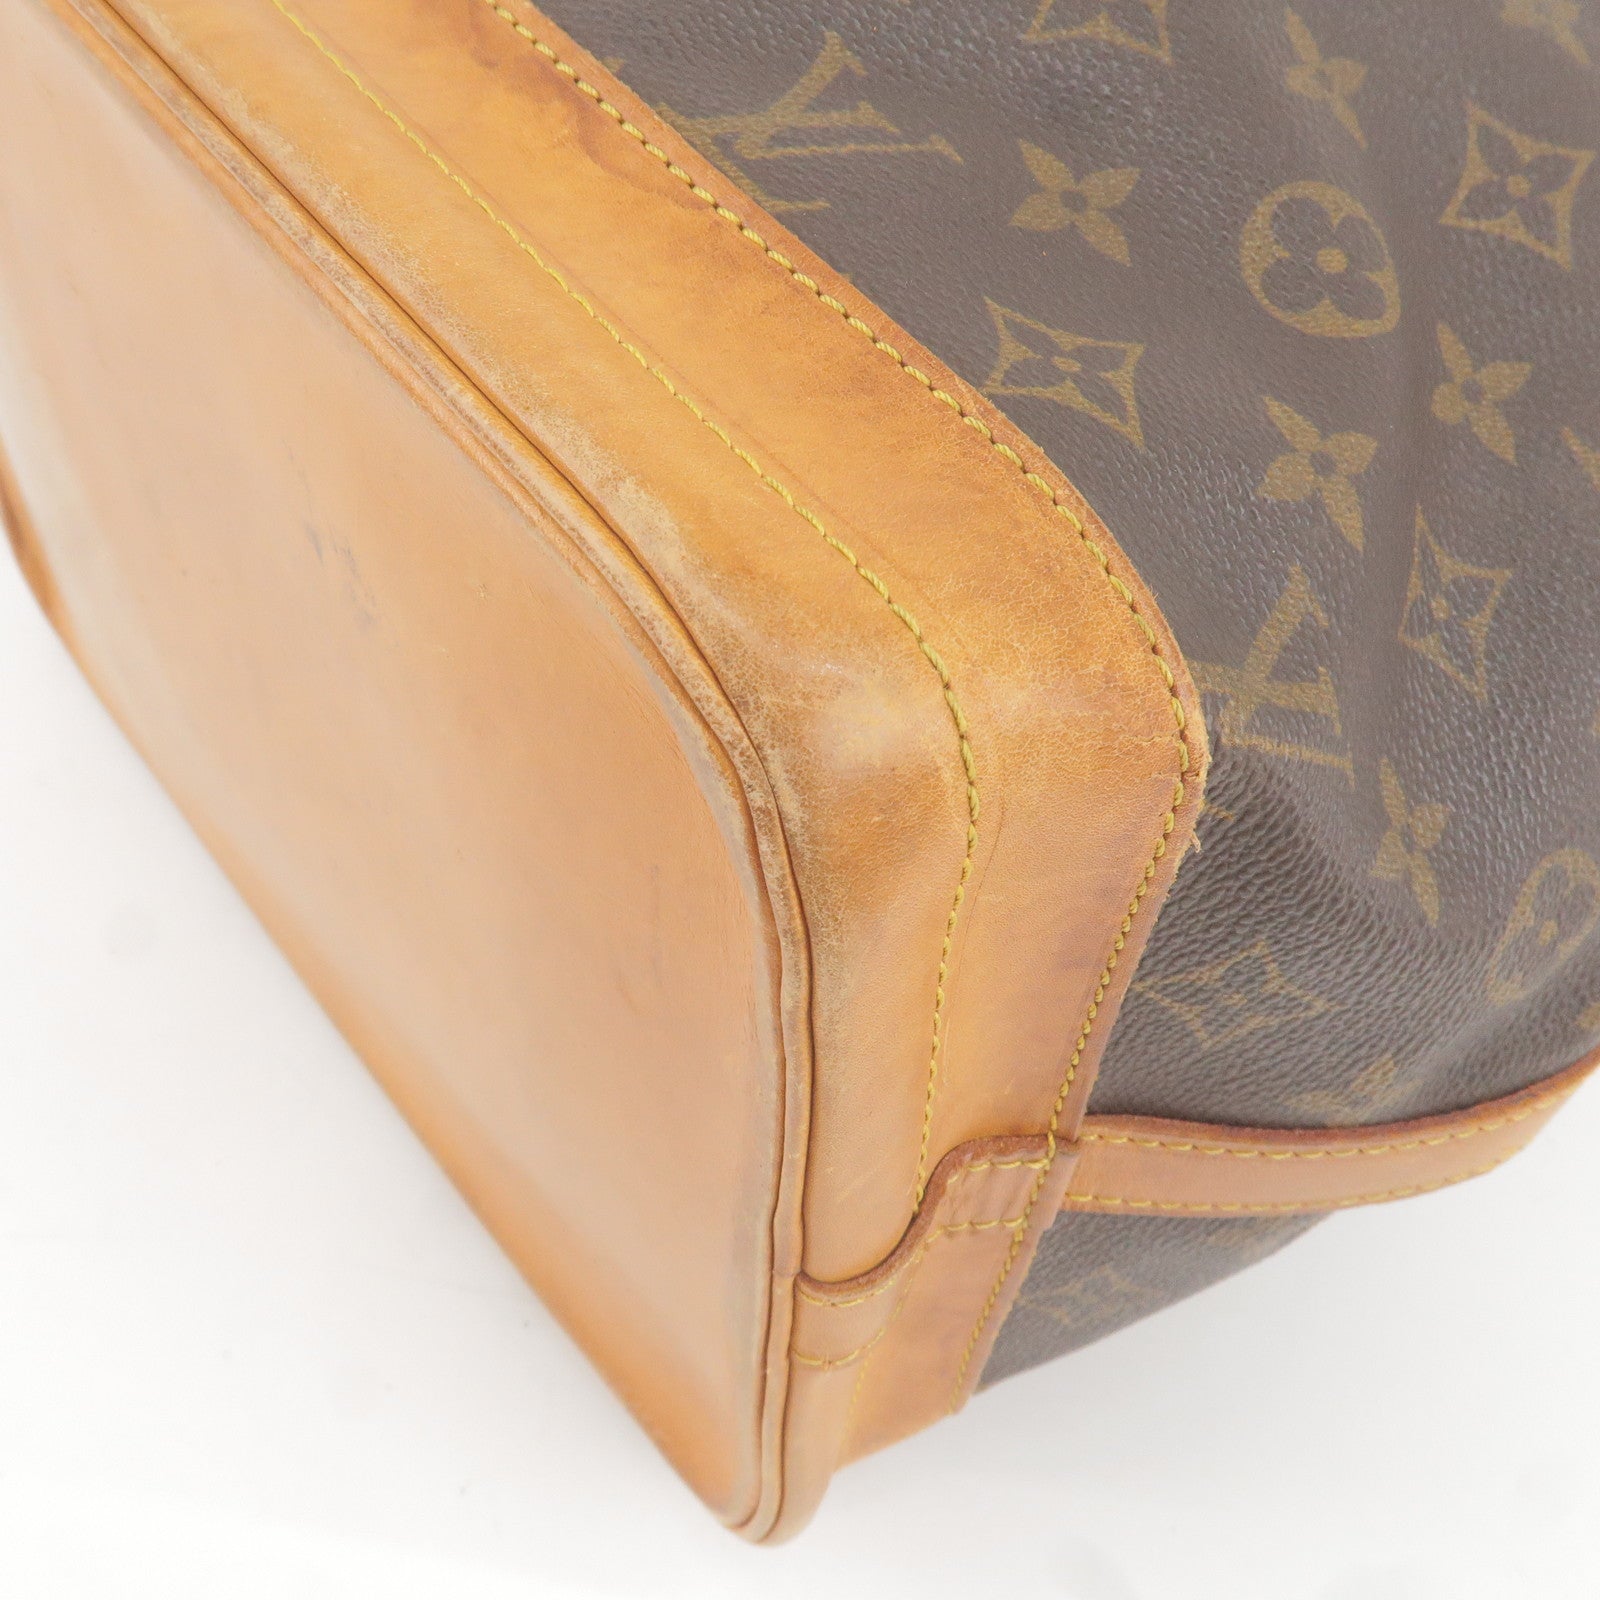 LOUIS VUITTON Women's Nocturne Leather in Brown